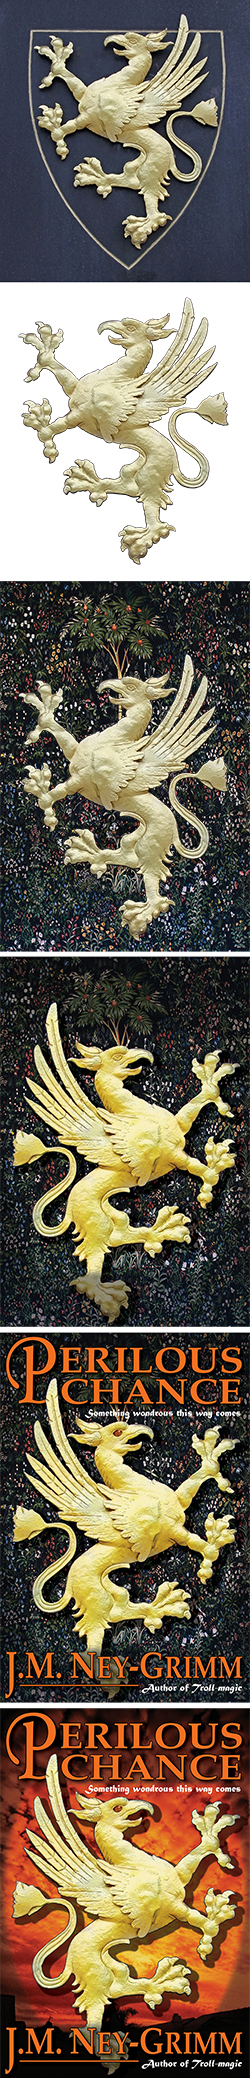 Bas relief gryphon with background